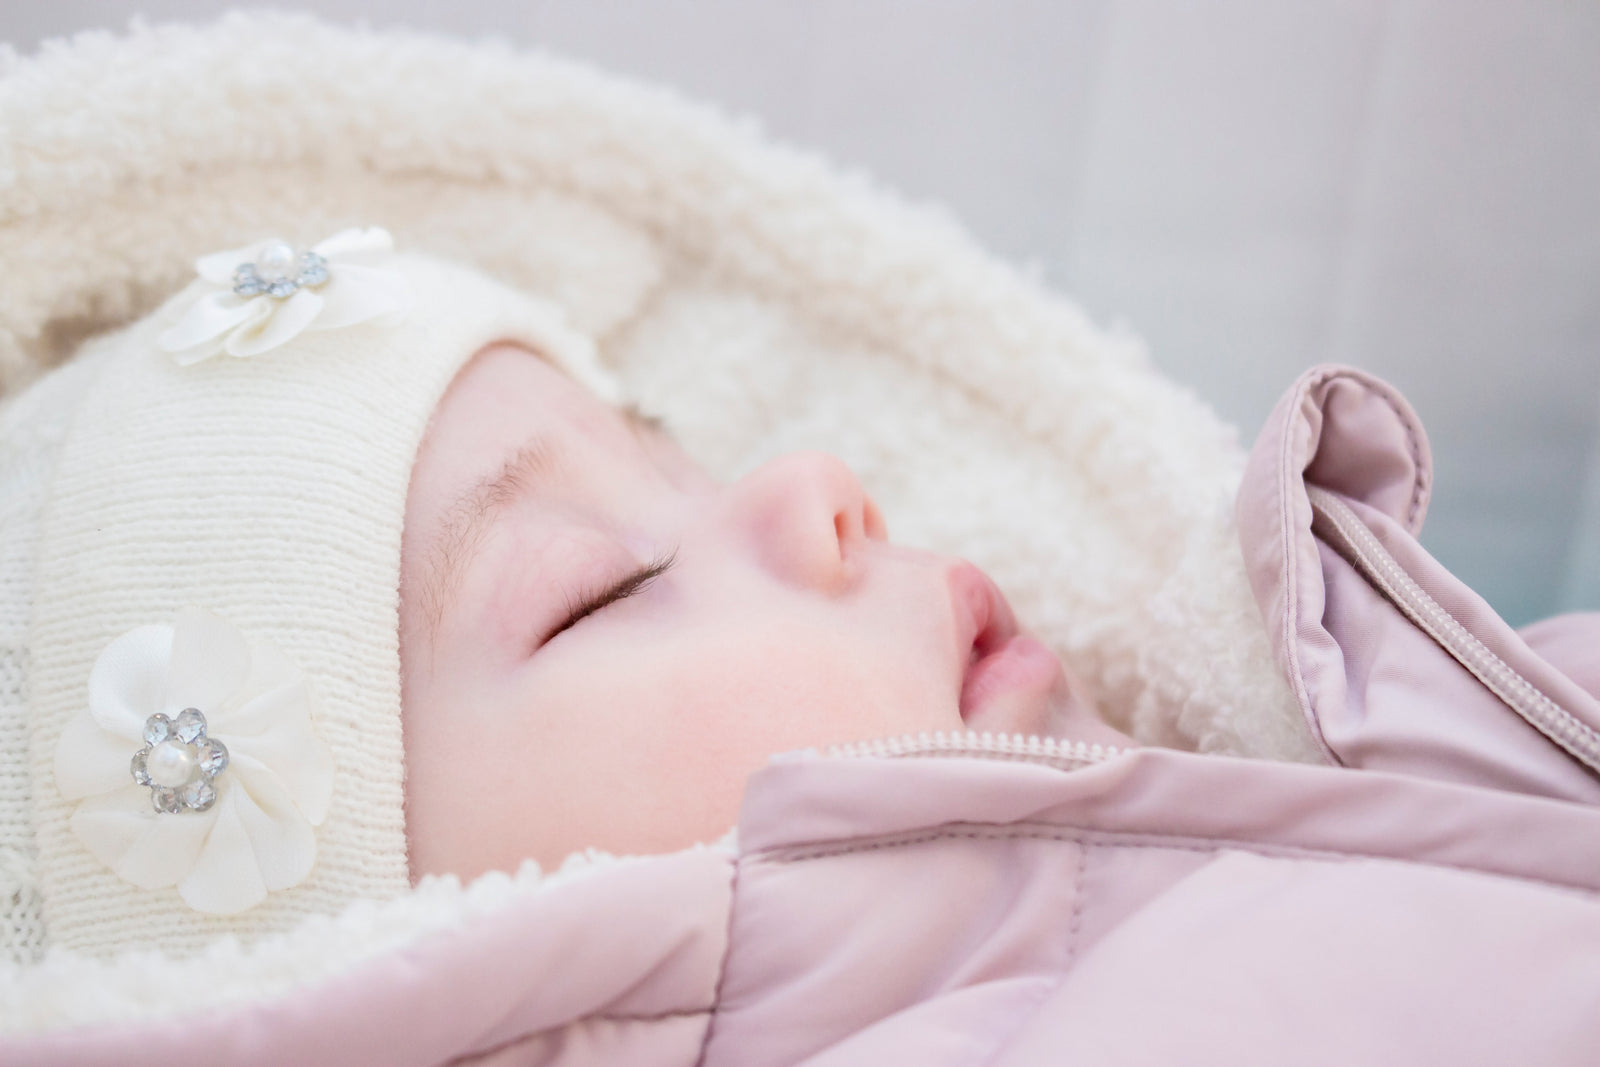 Baby in newborn baby clothes staying warm at night